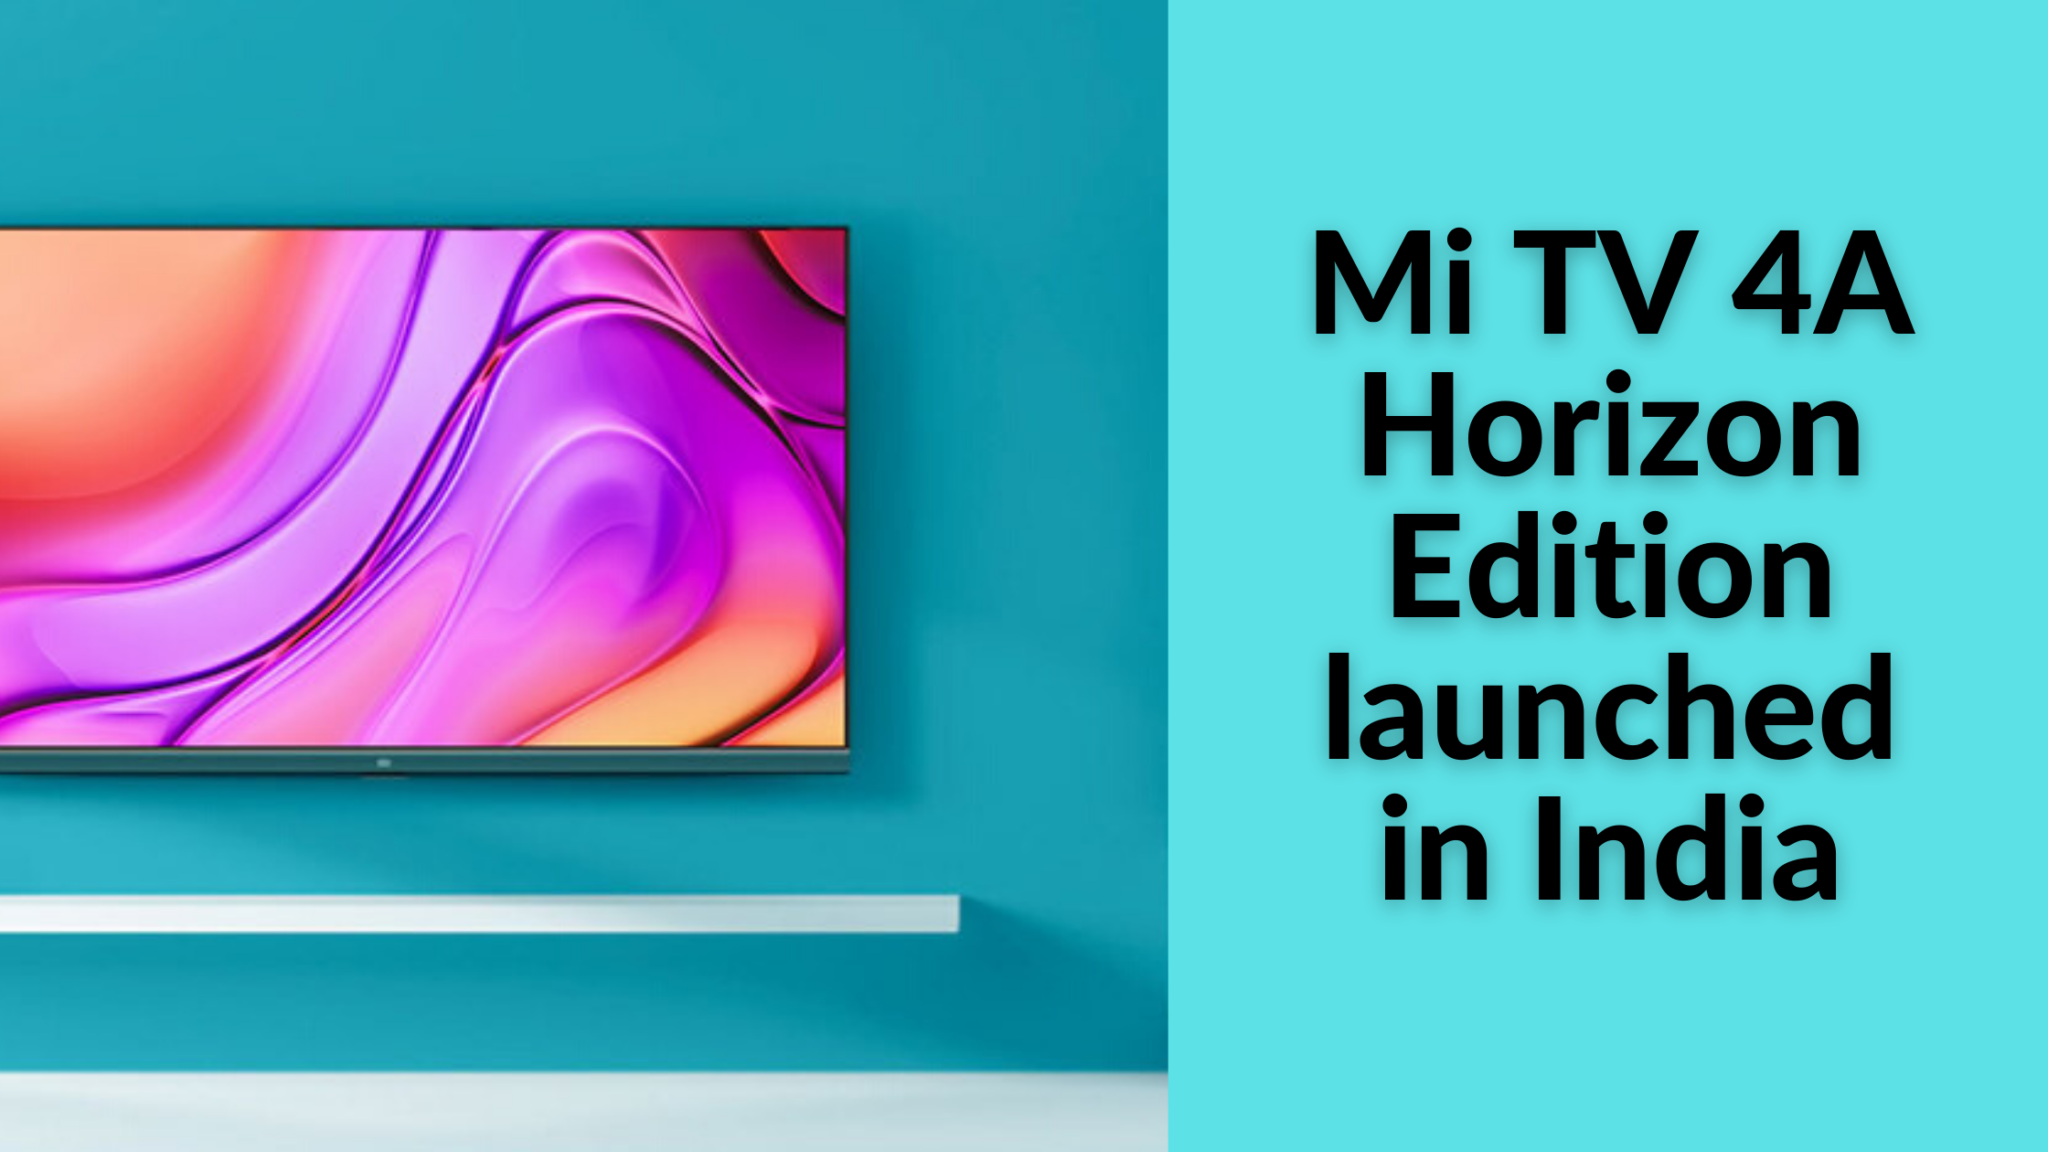 Mi TV 4A Horizon Edition TVs launched in India